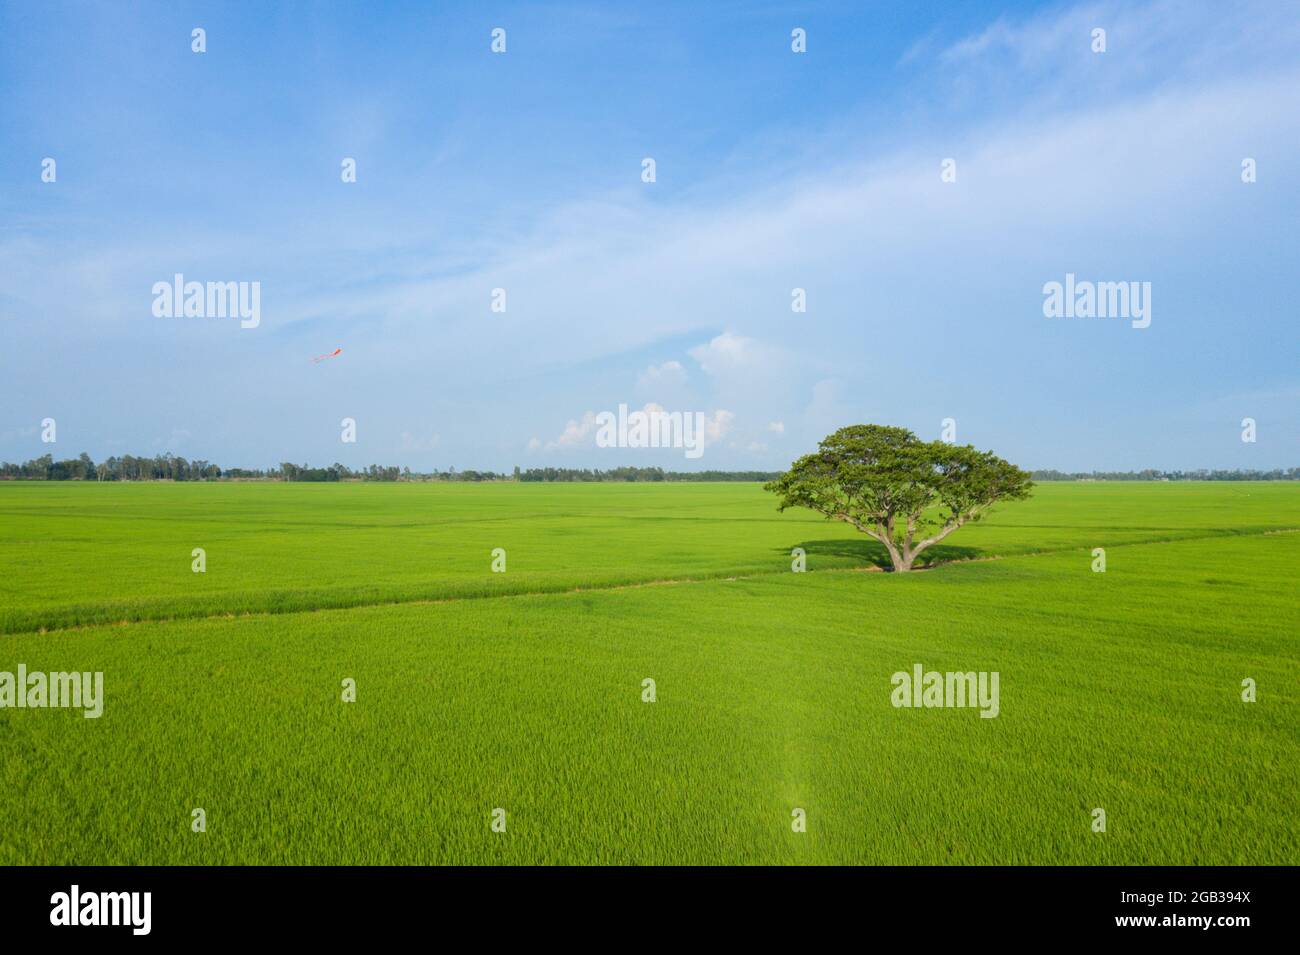 Summer field with a lonely tree in clear sky. Beautiful nature landscape, nice weather. Peaceful scene with alone tree, green fields Stock Photo